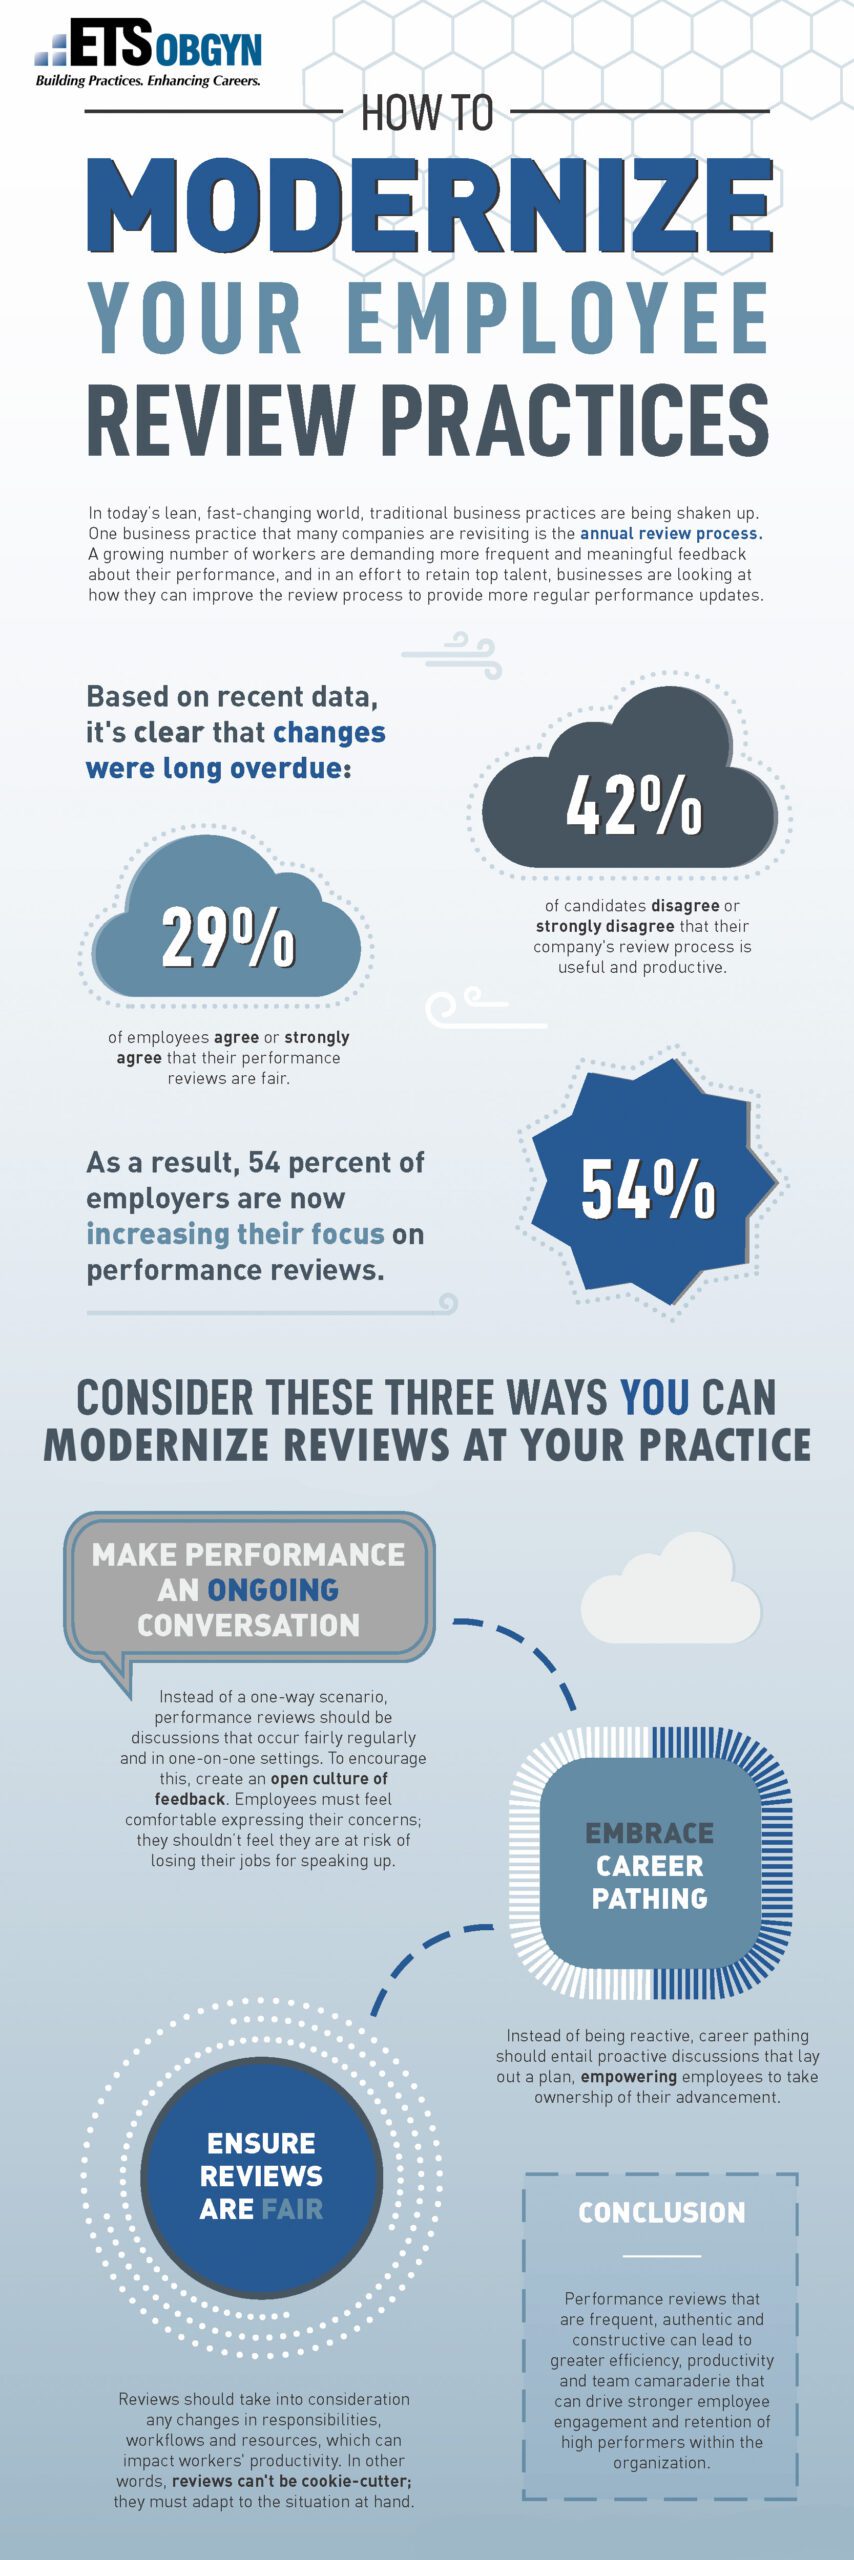 Infographic: How to Modernize Your Employee Review Practices